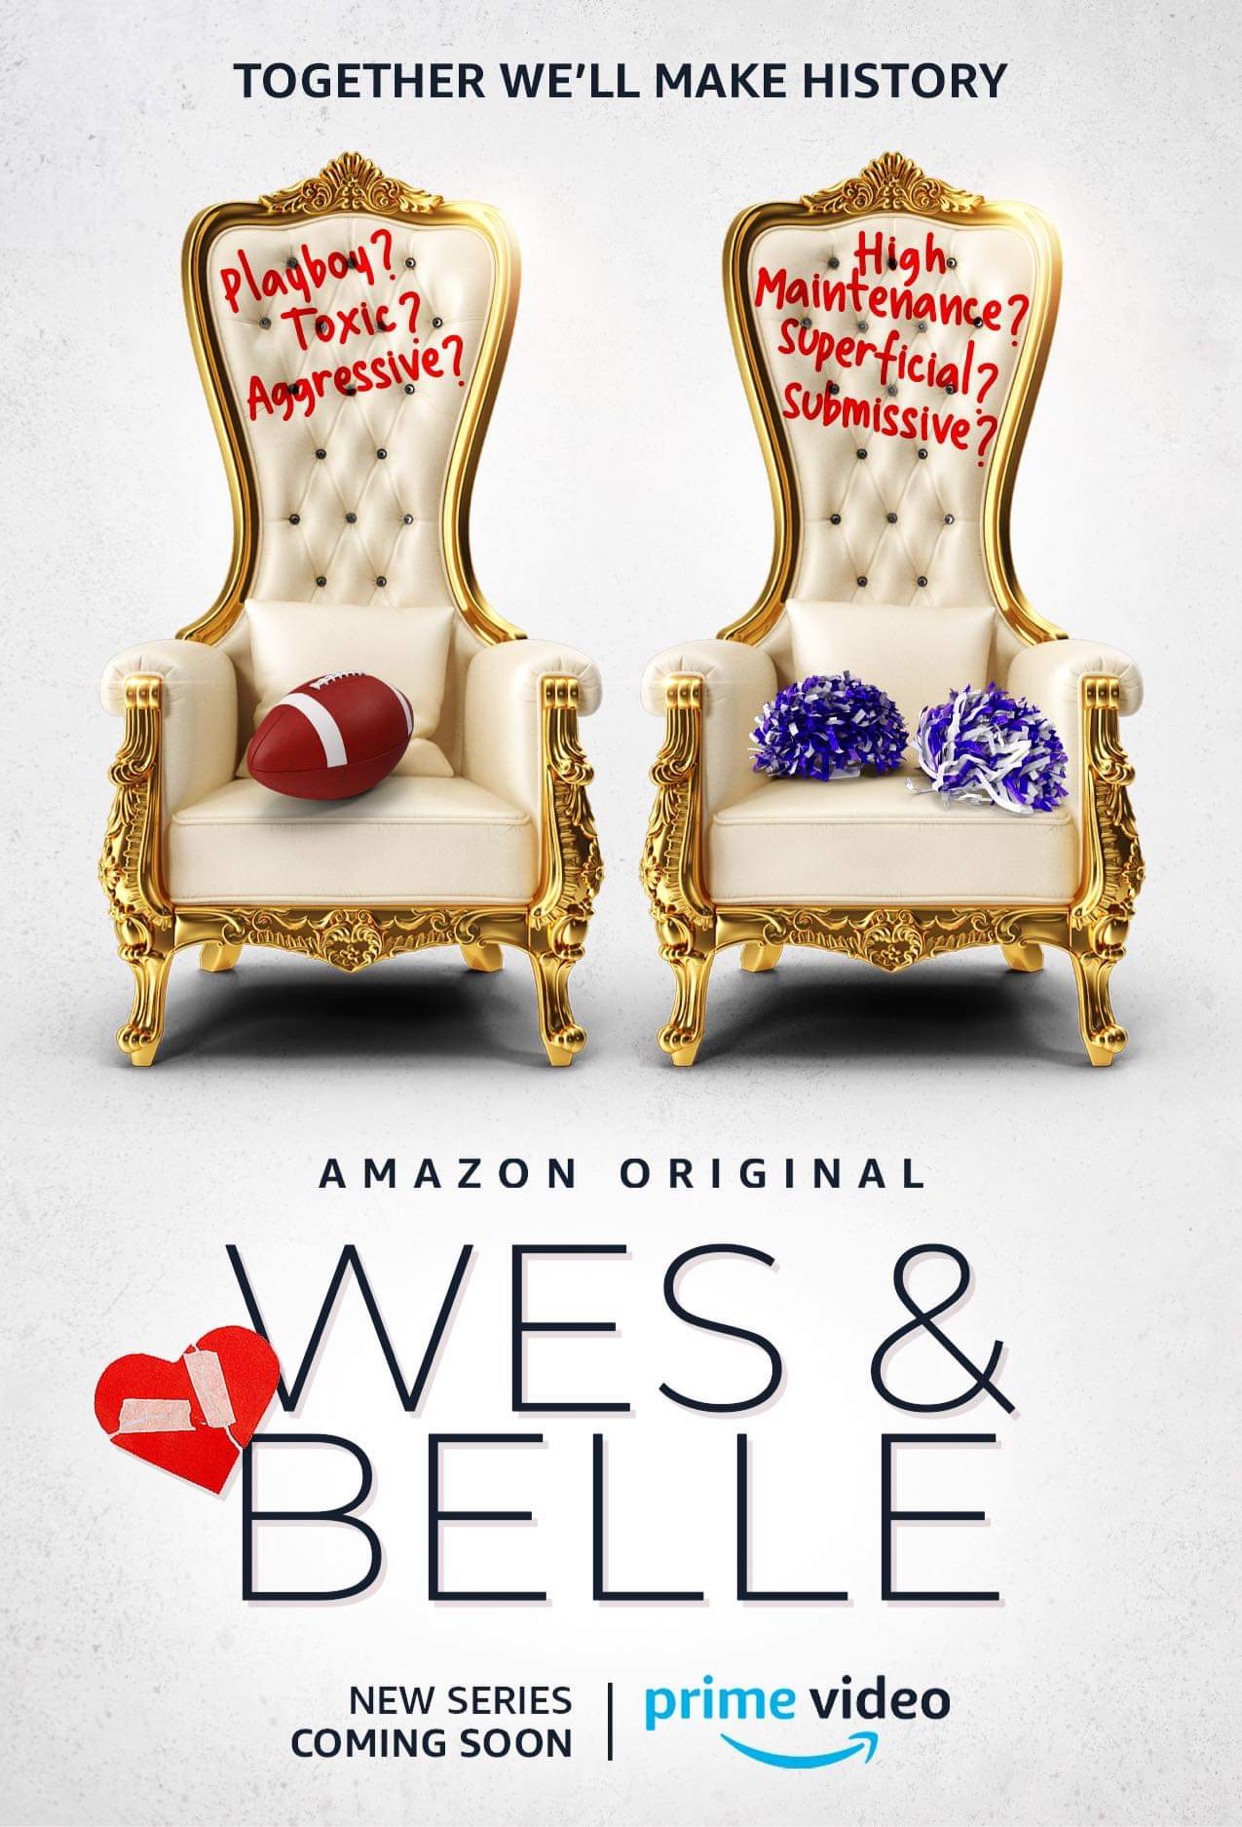 Amazon’s Prime Video Will Enter The Teen Drama Market With "Wes & Belle"